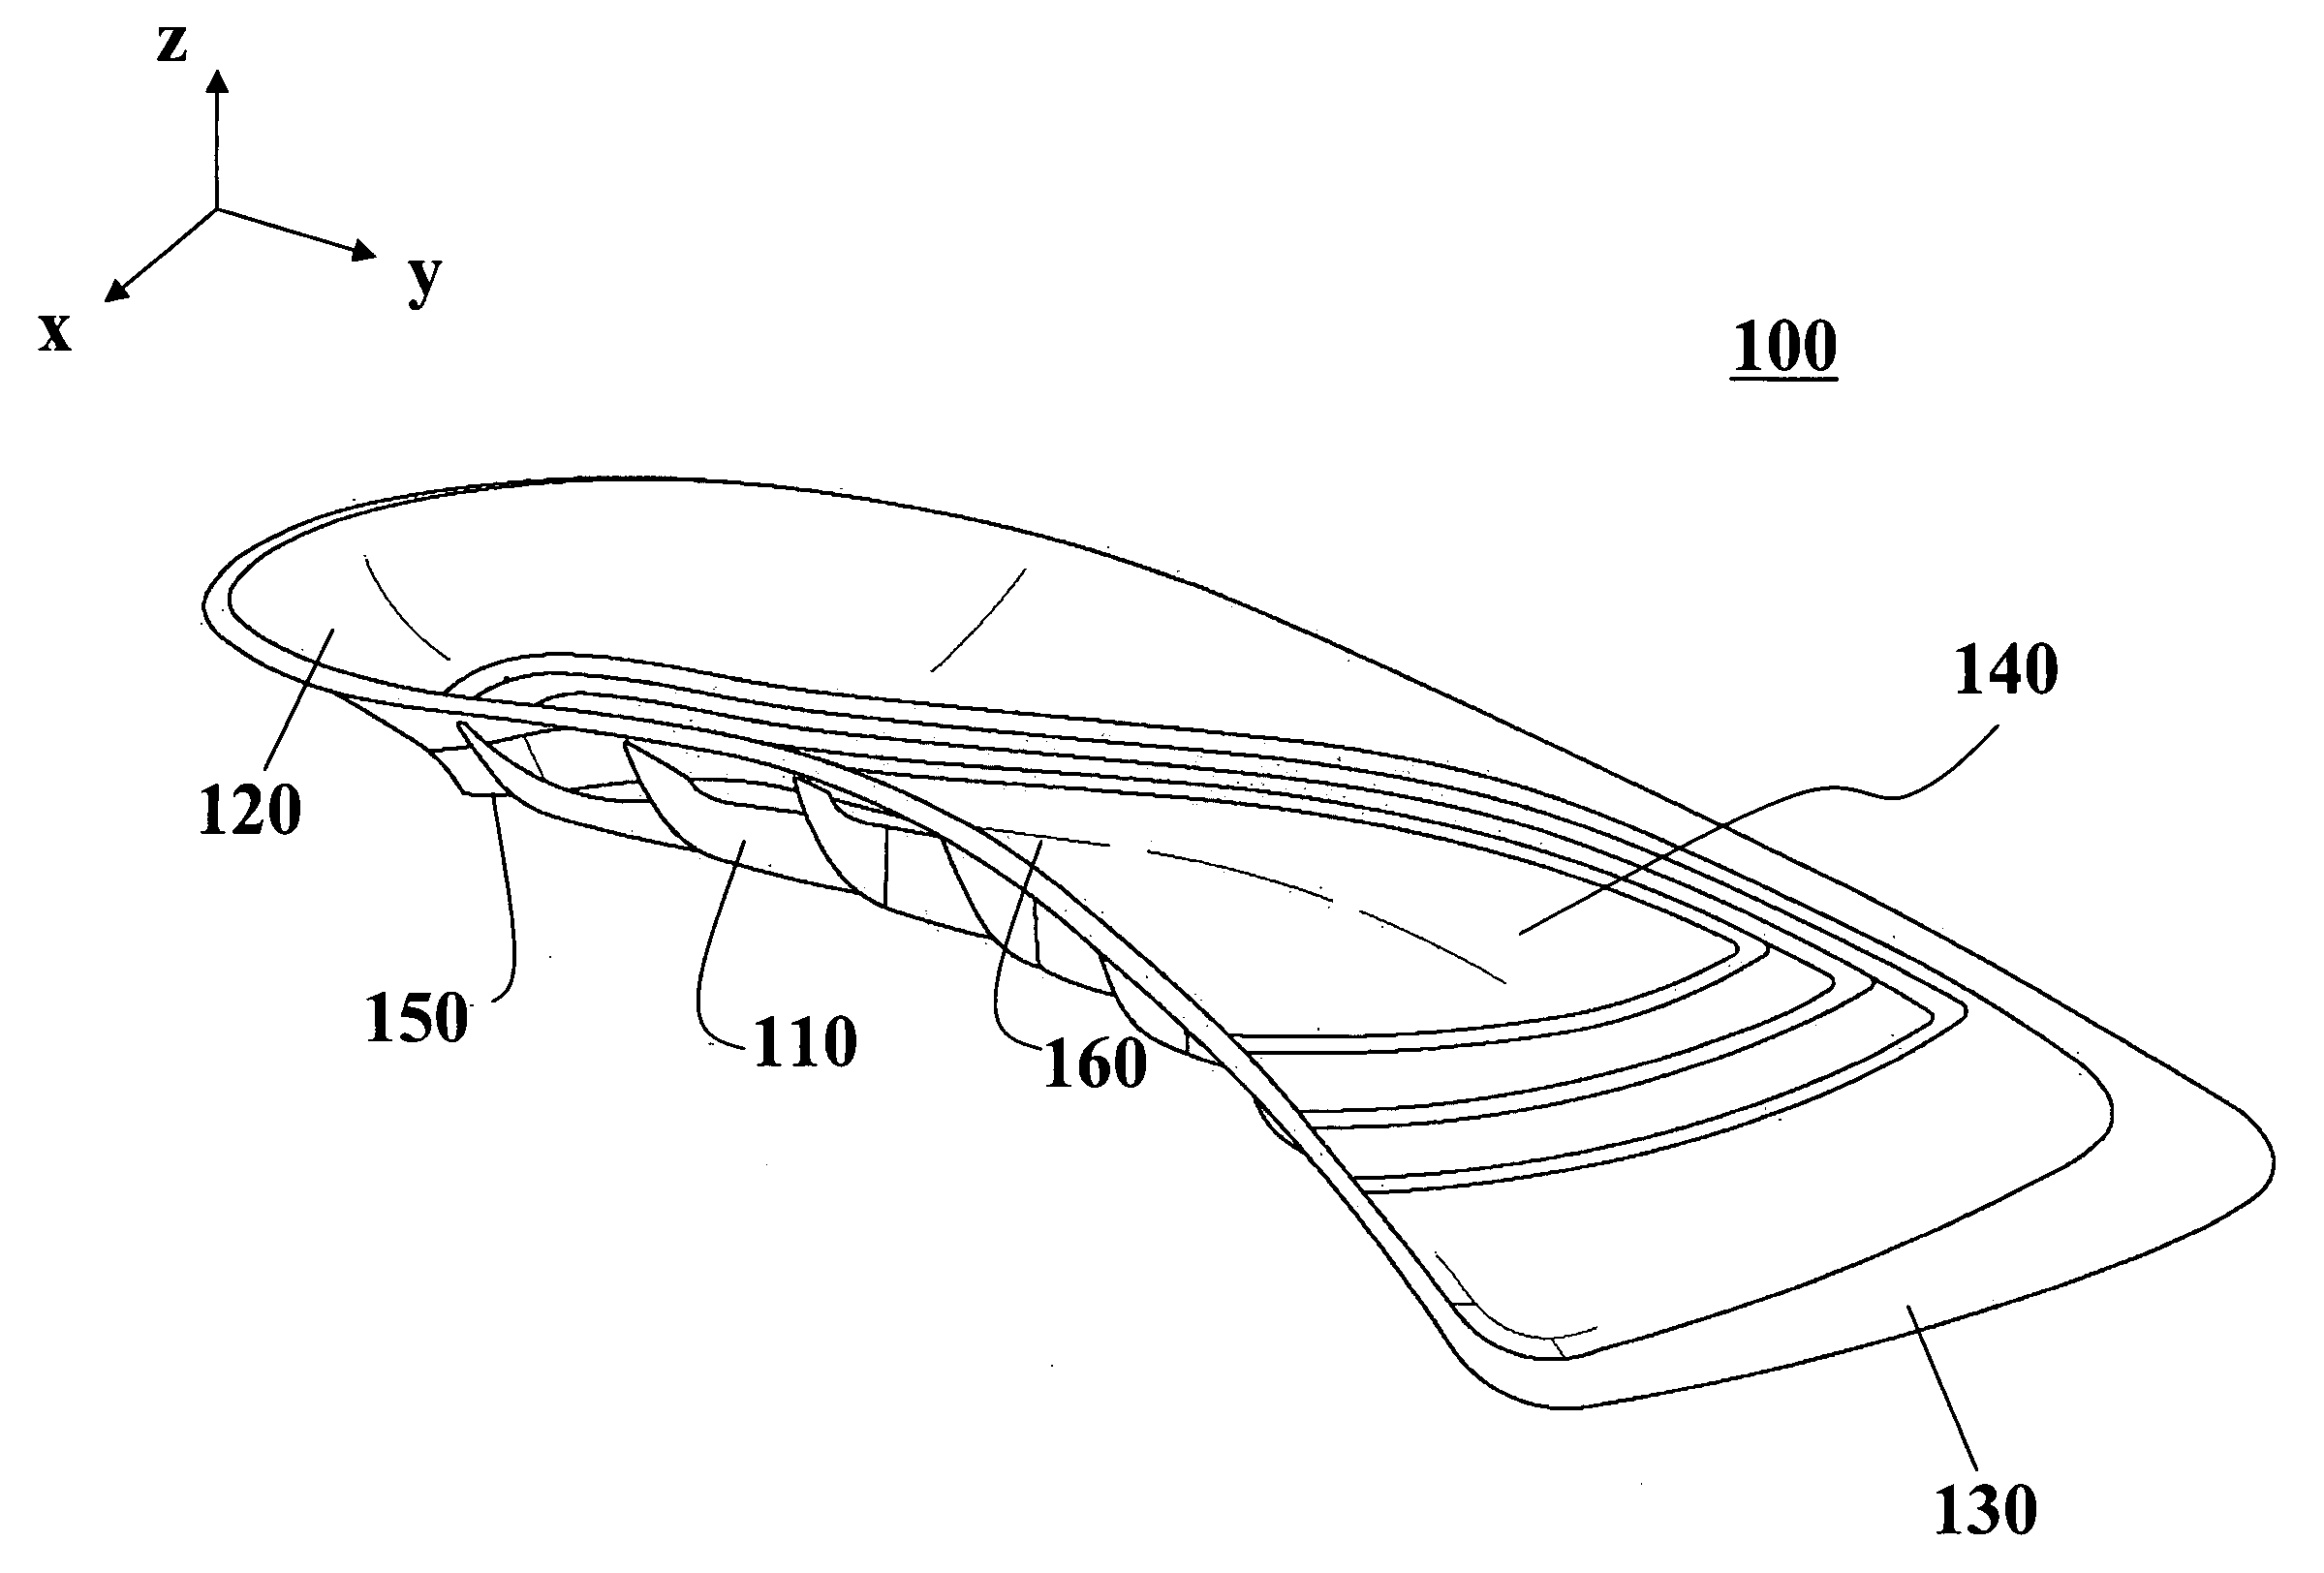 Arch support with a patterned surface